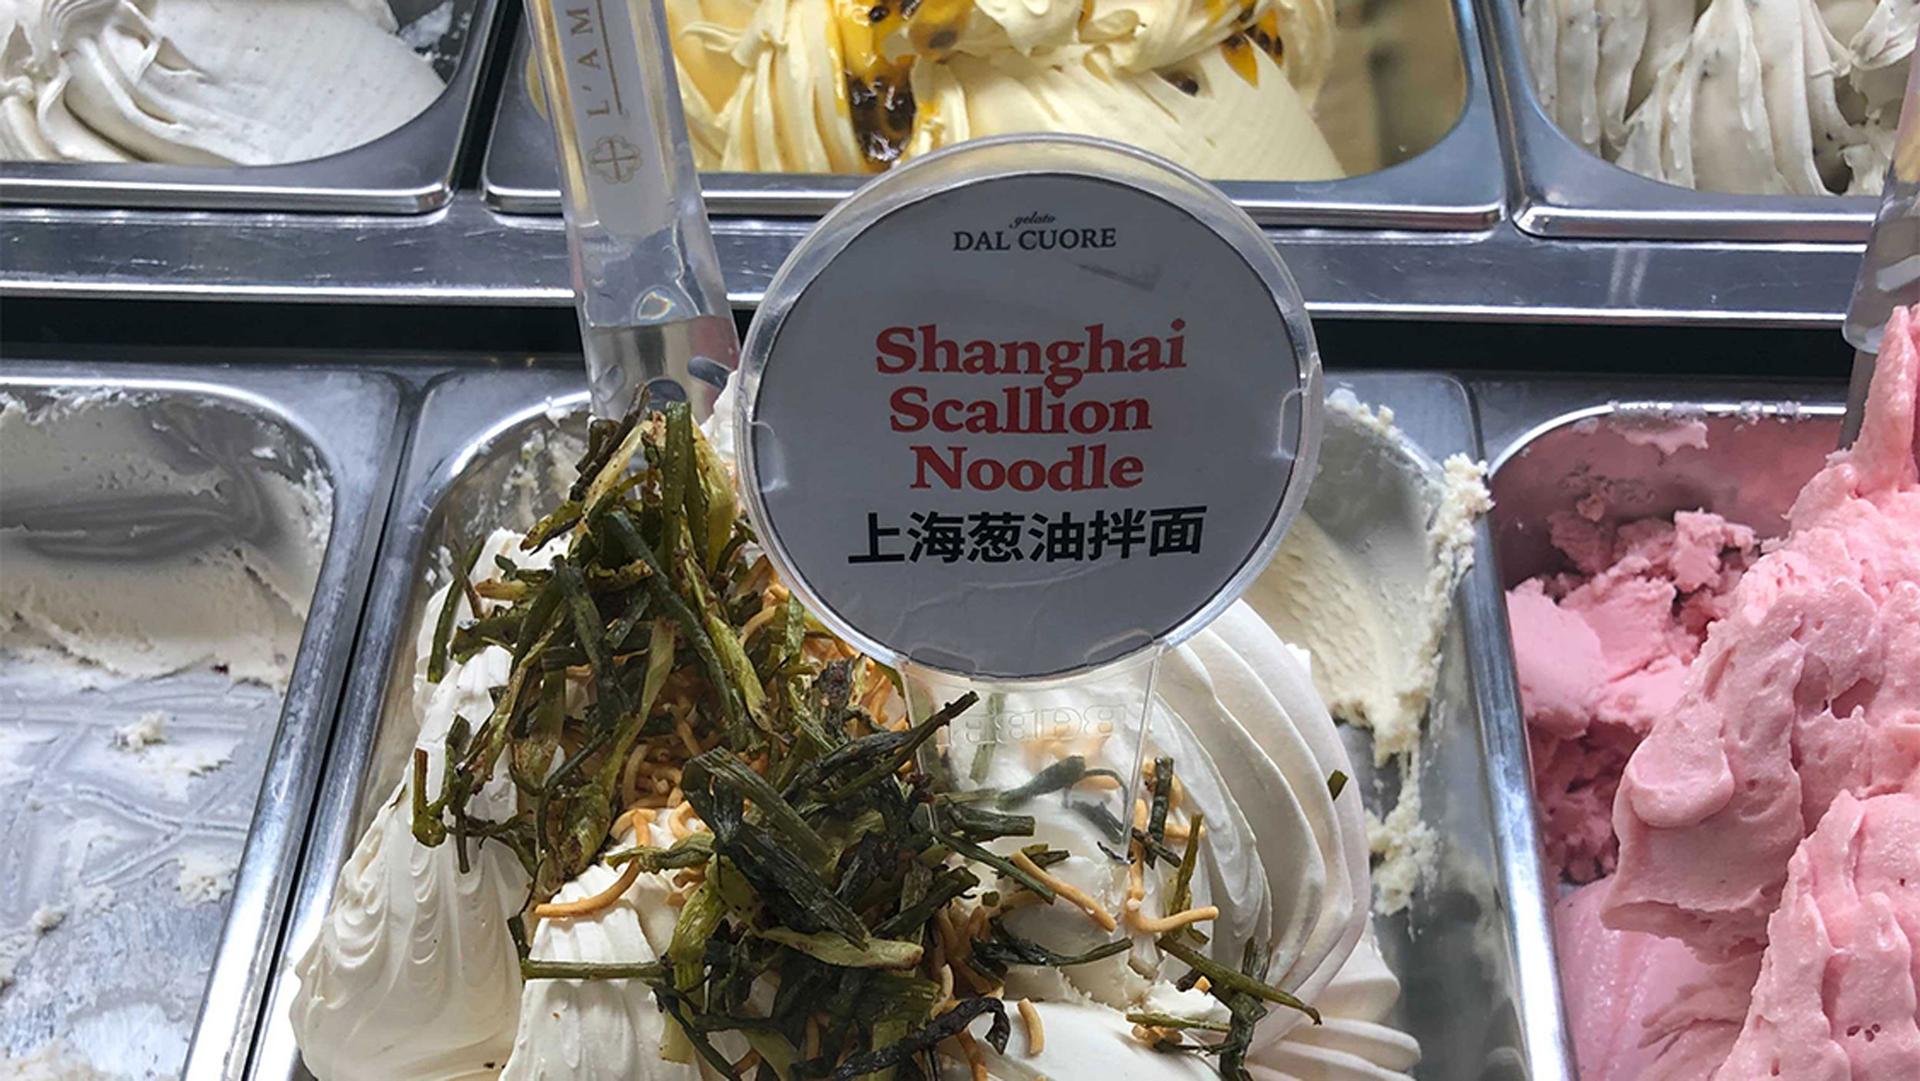 Various ice cream flavors with Shanghai scallion noodle featured in the middle